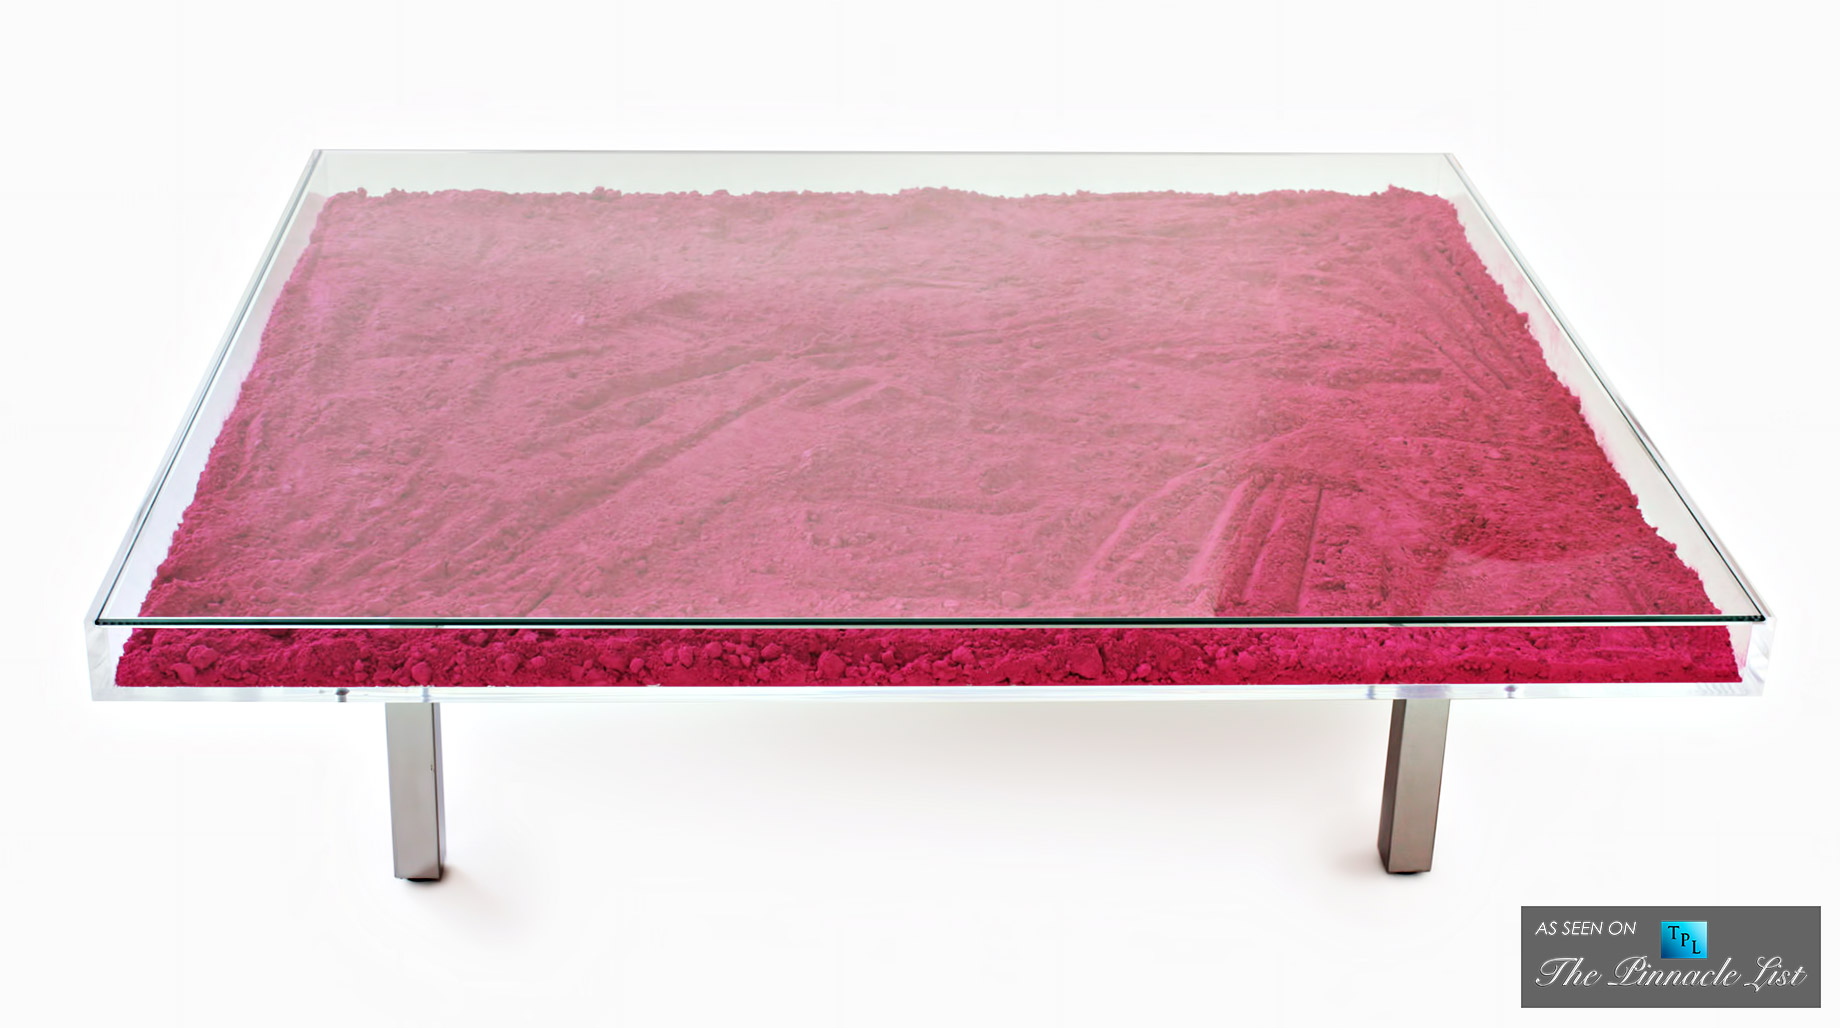 Contemporary Art as Modern Luxury Furniture - Spotlighting the Yves Klein Table of 1963